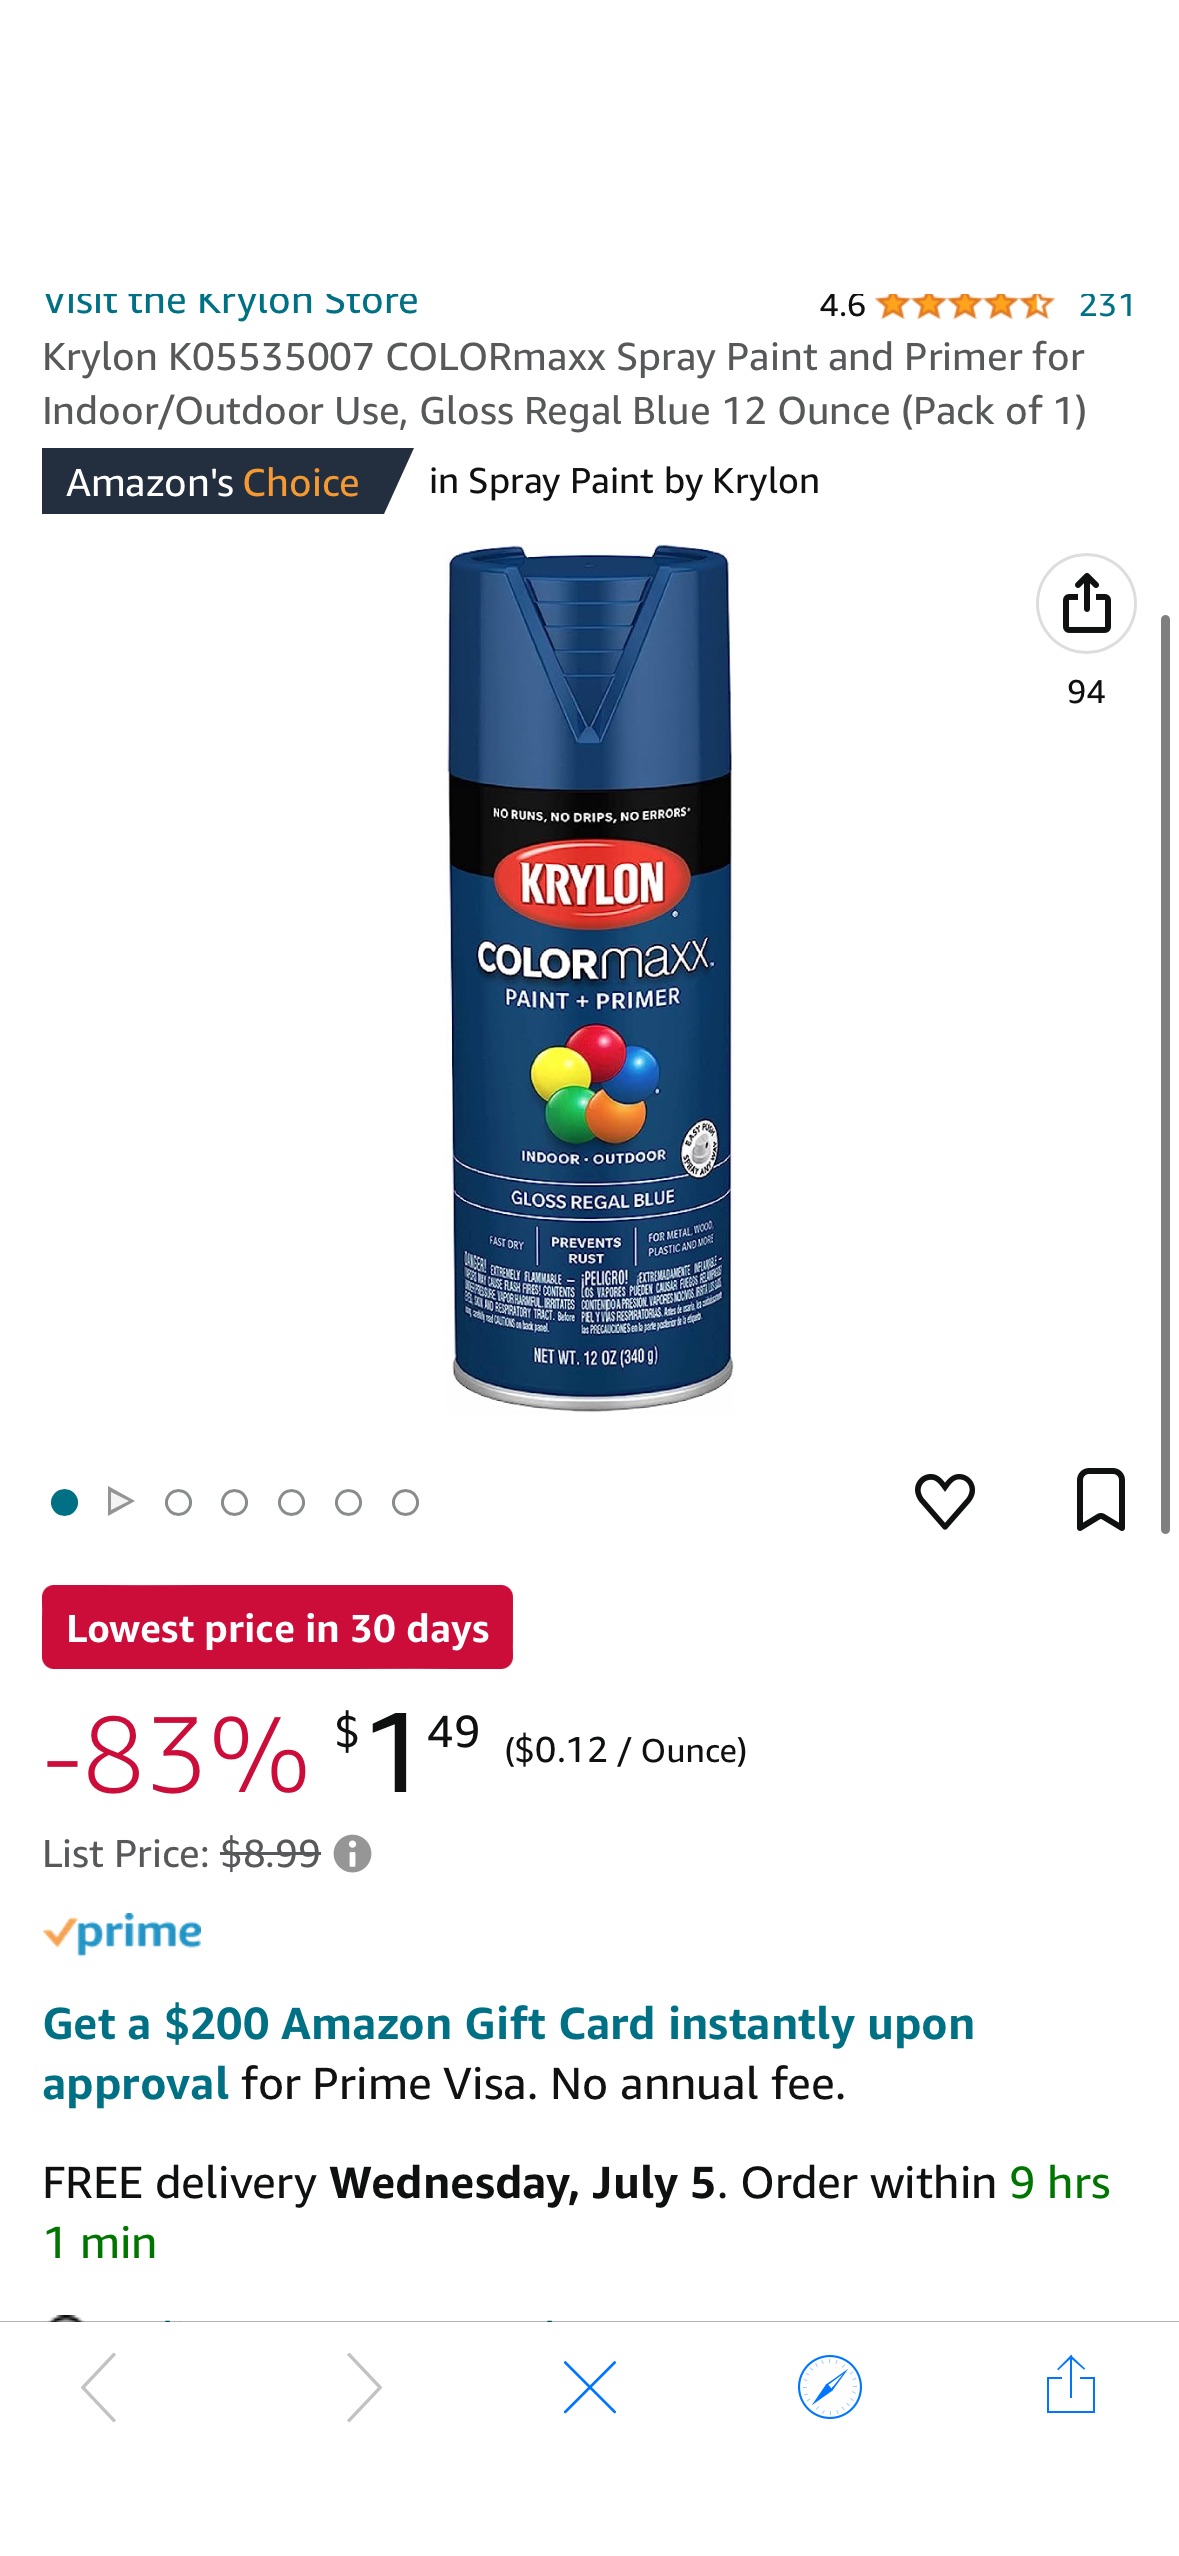 Krylon K05535007 COLORmaxx Spray Paint and Primer for Indoor/Outdoor Use, Gloss Regal Blue 12 Ounce (Pack of 1) - - Amazon.com